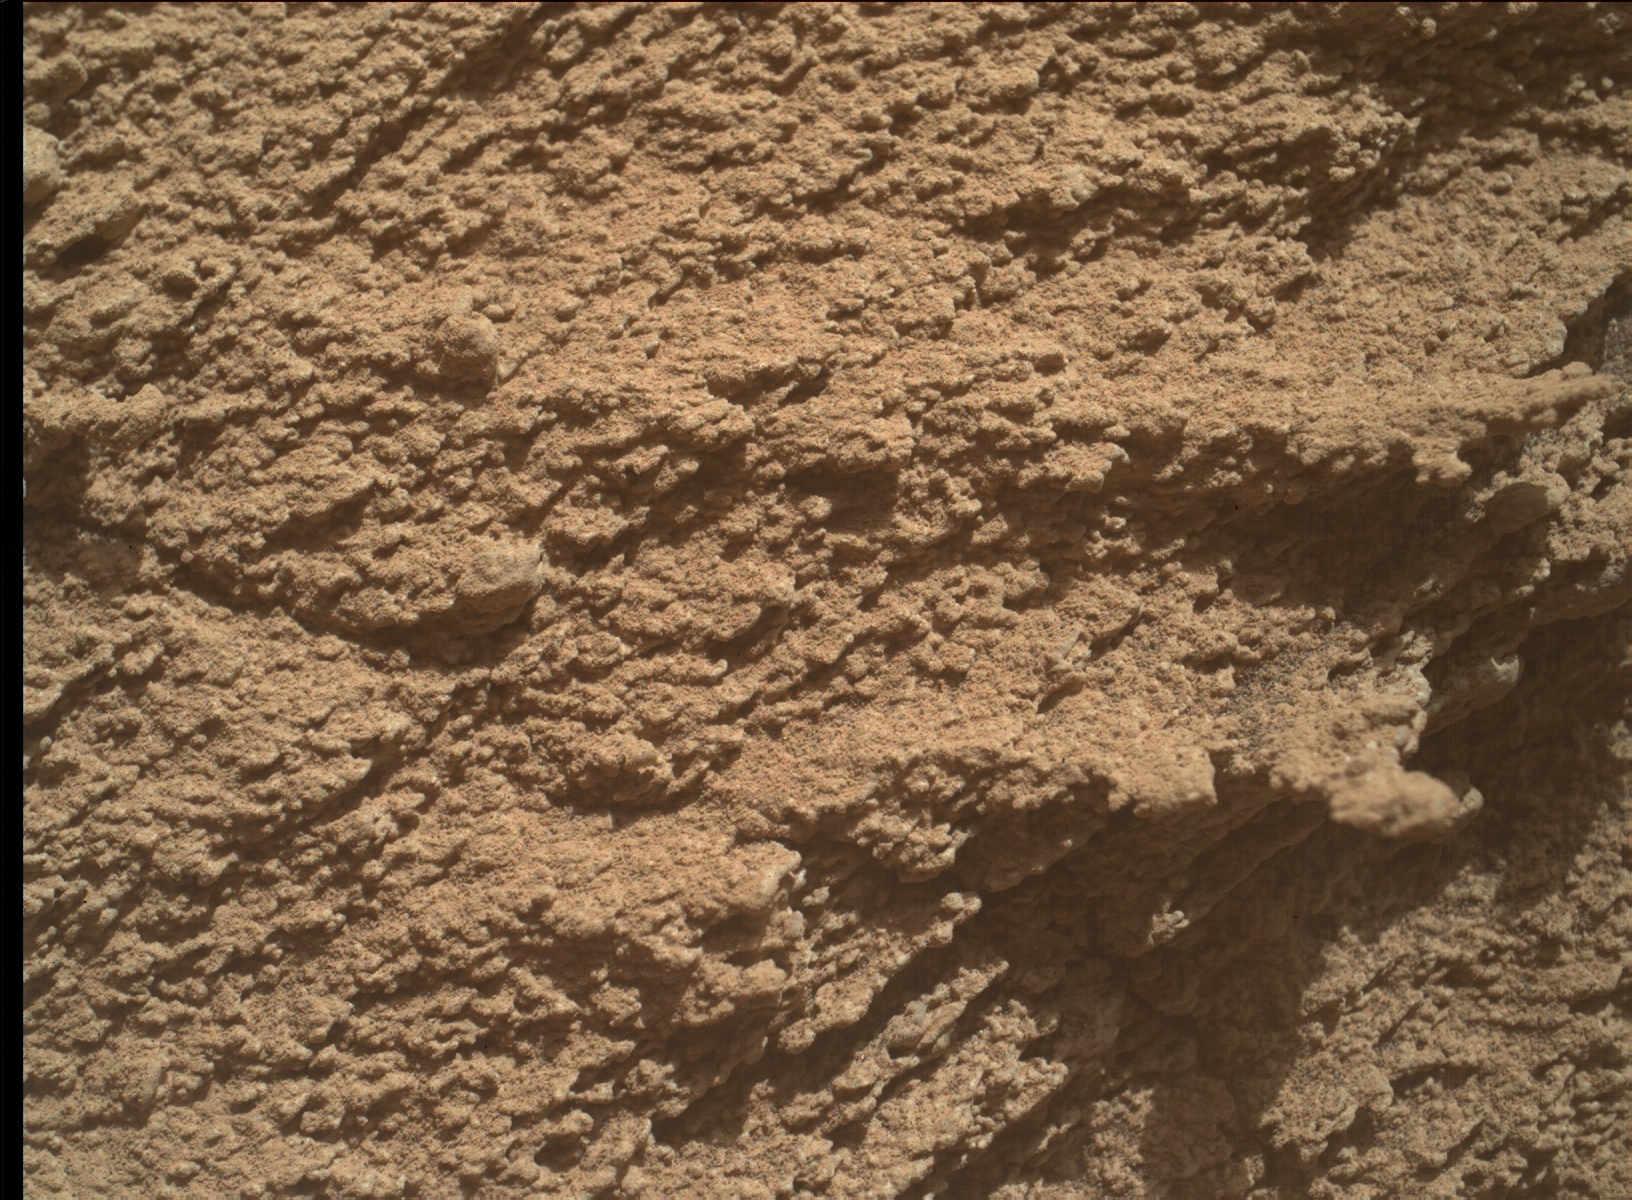 Nasa's Mars rover Curiosity acquired this image using its Mars Hand Lens Imager (MAHLI) on Sol 3798